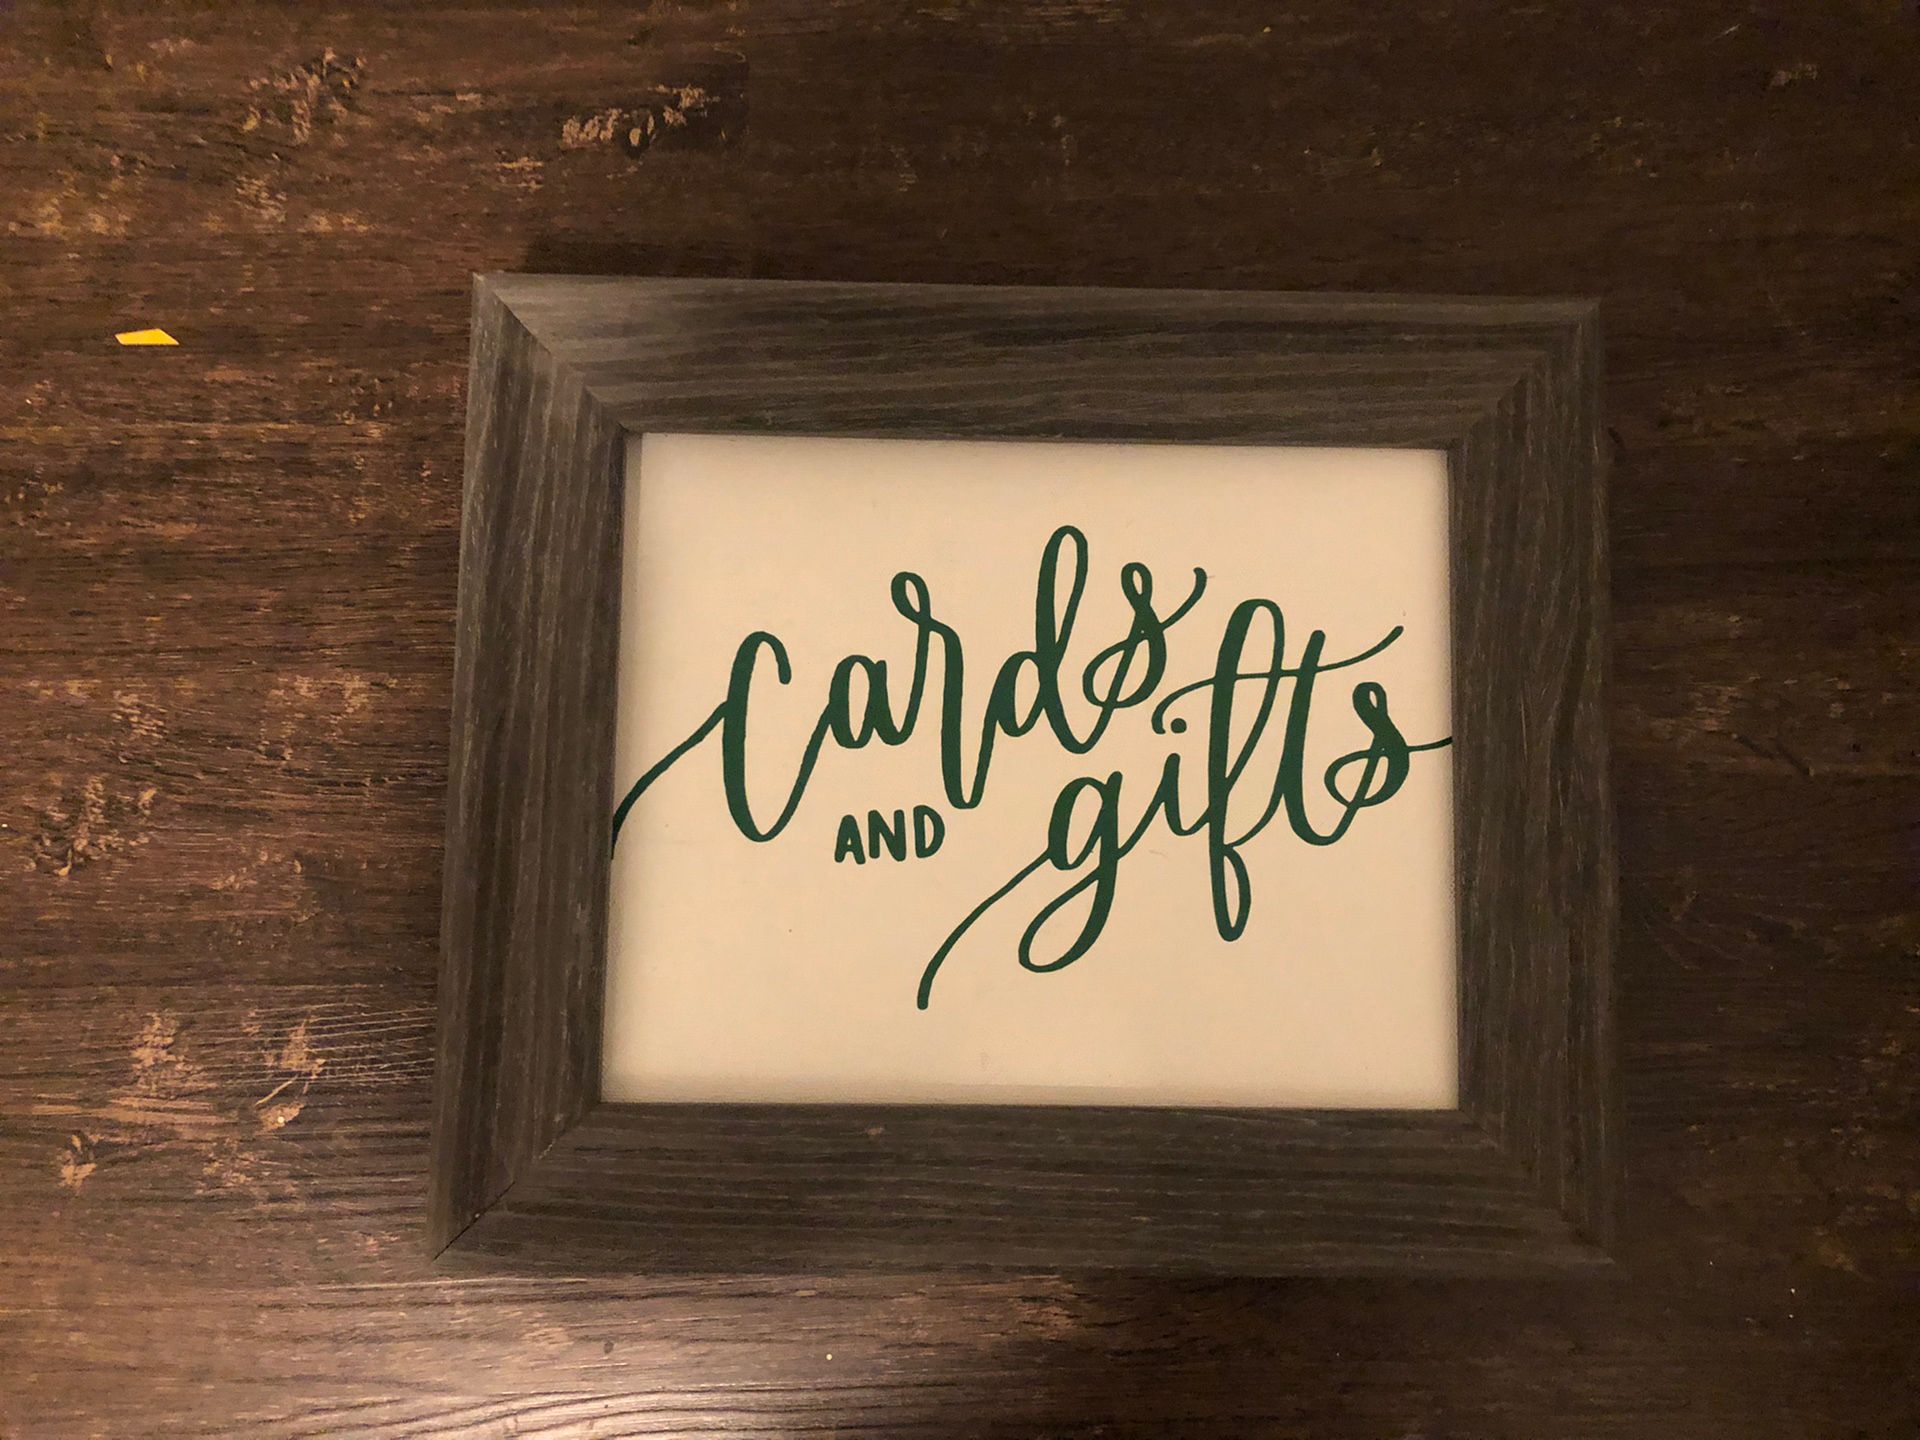 Wedding Cards & Gifts Sign